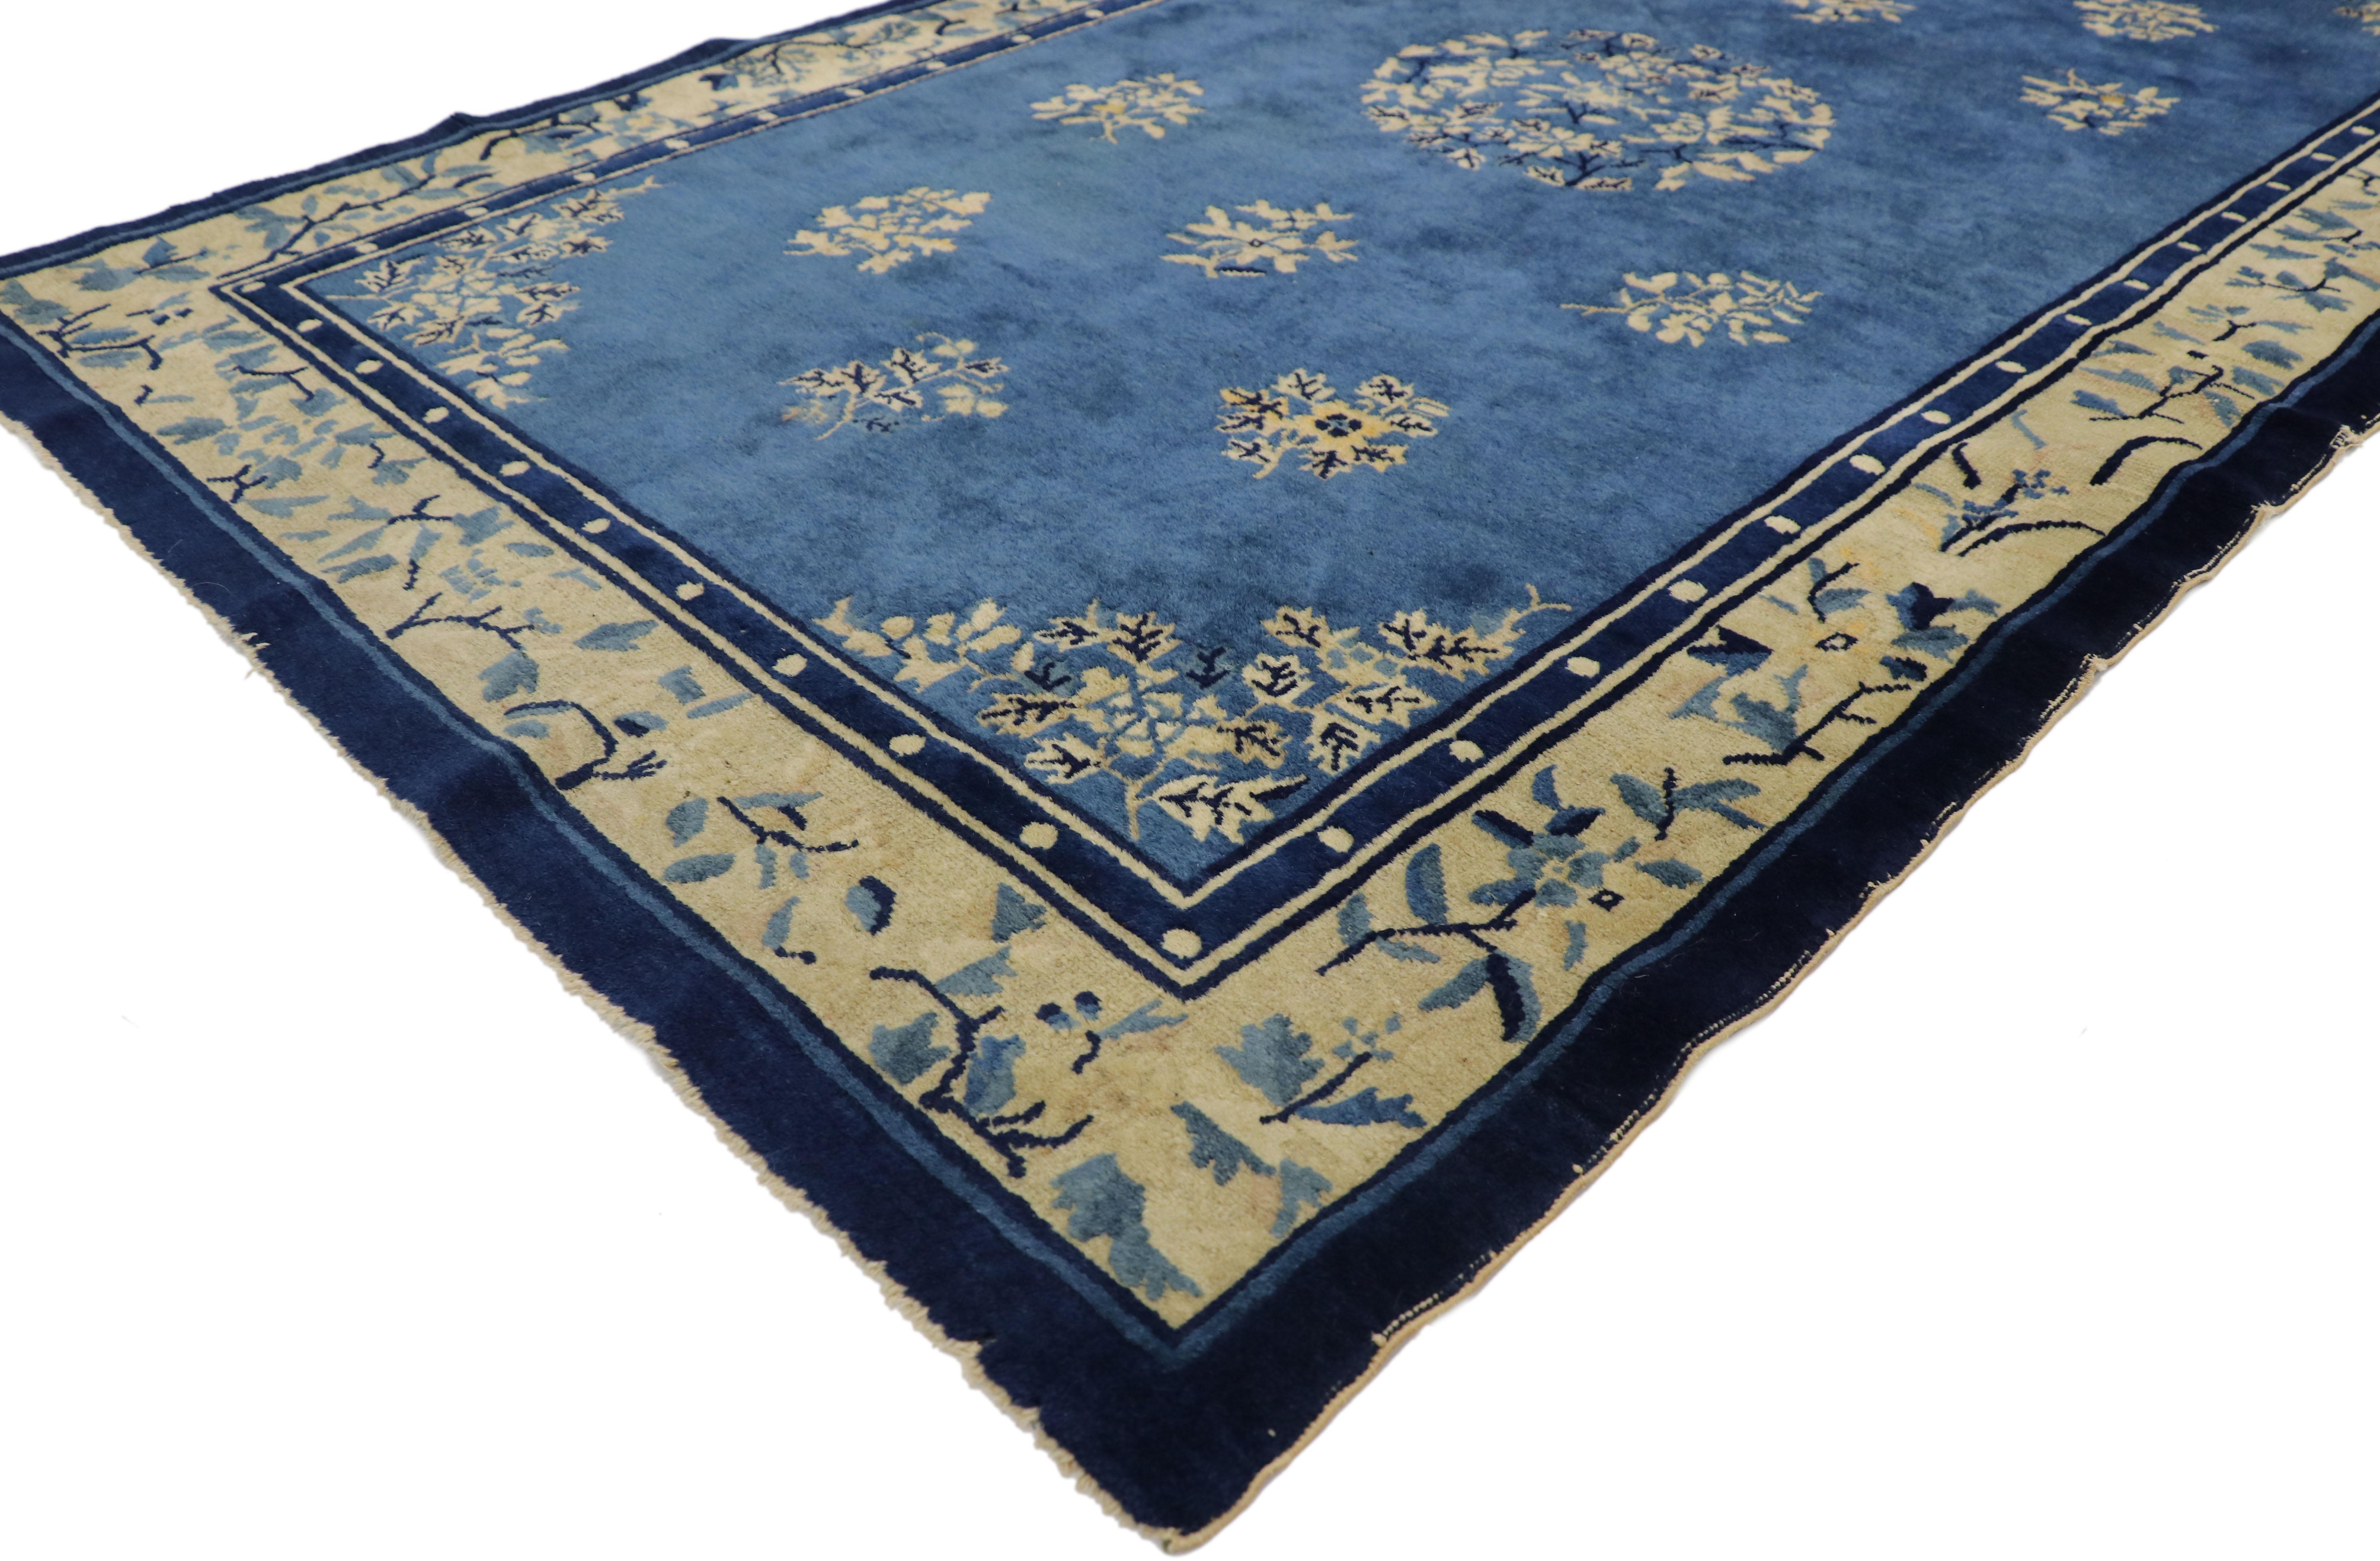 77330 Antique Chinese Peking Rug with Romantic Chinoiserie Style 04'01 x 06'09. This hand-knotted wool antique Chinese Peking rug features a rounded open floral medallion floating in the center of an abrashed blue field surrounded by a constellation